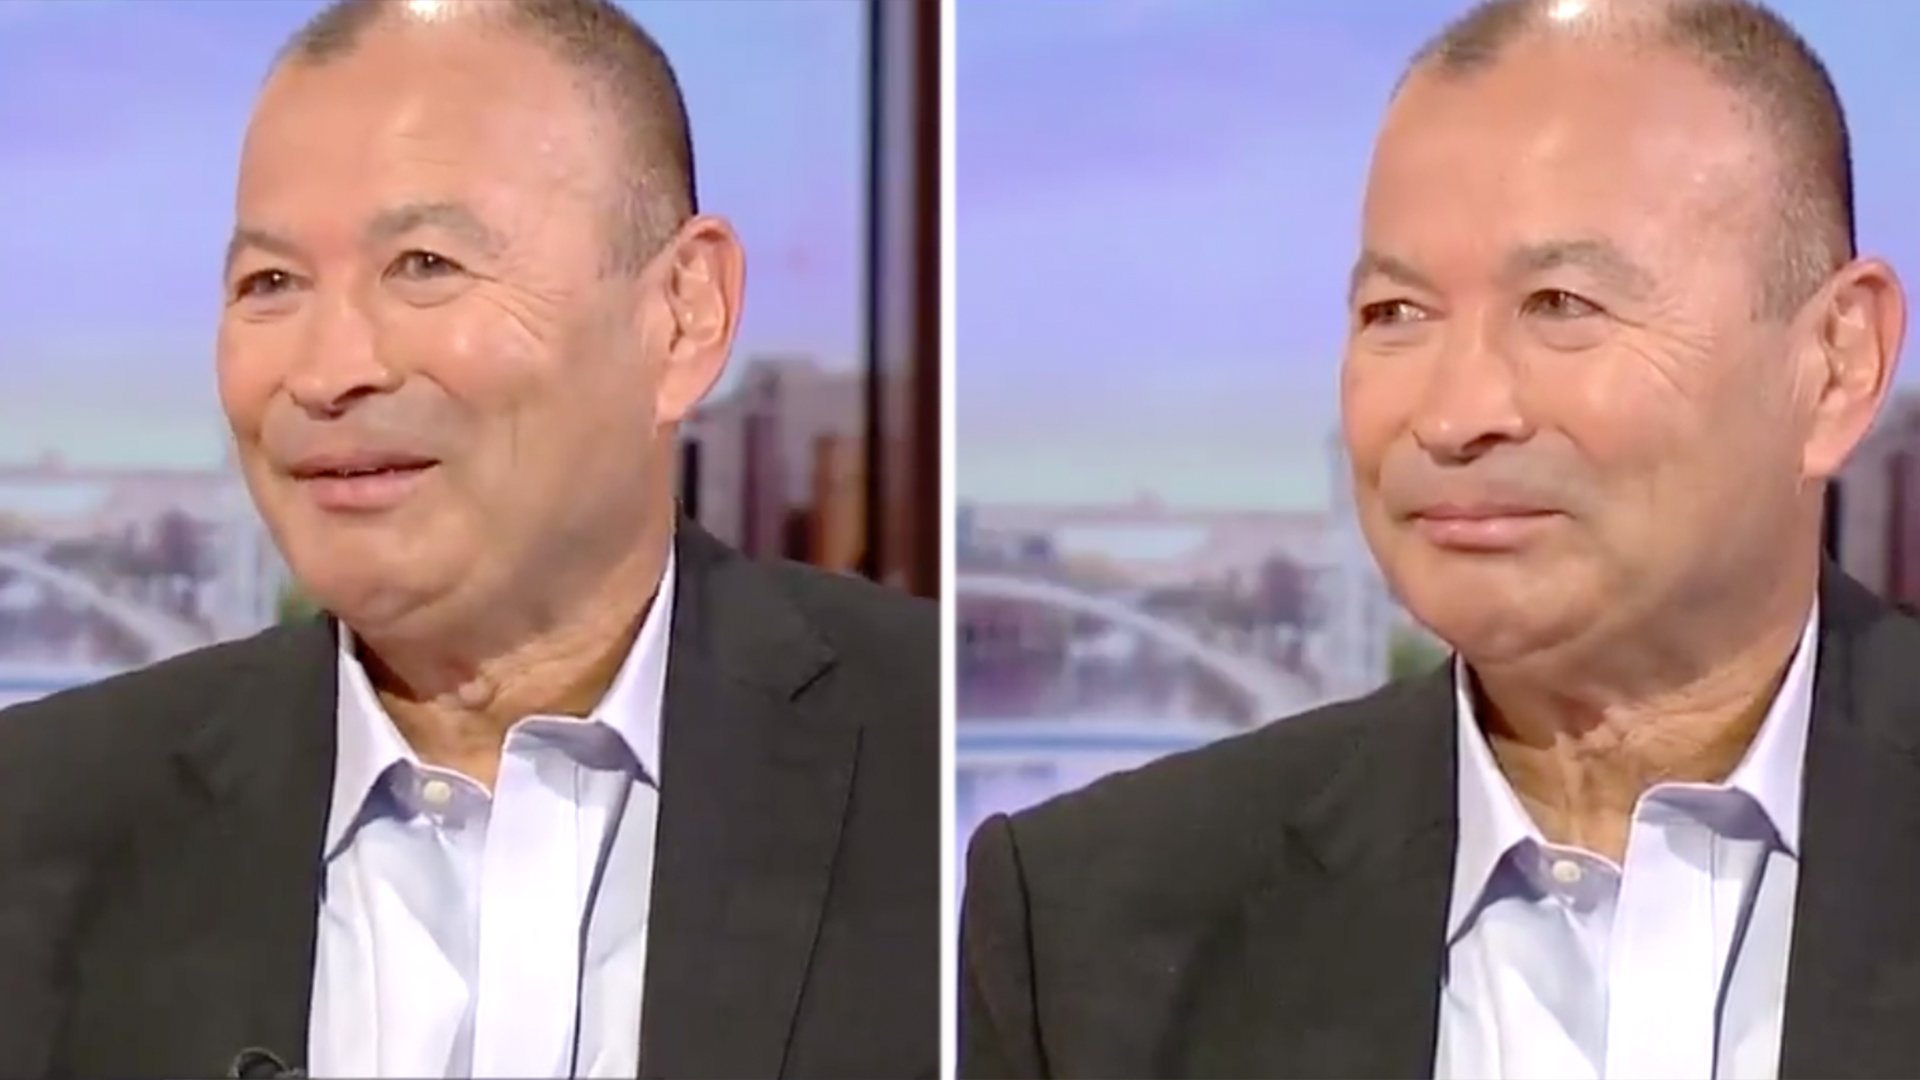 An emotional Eddie Jones appears on BBC Breakfast after World Cup